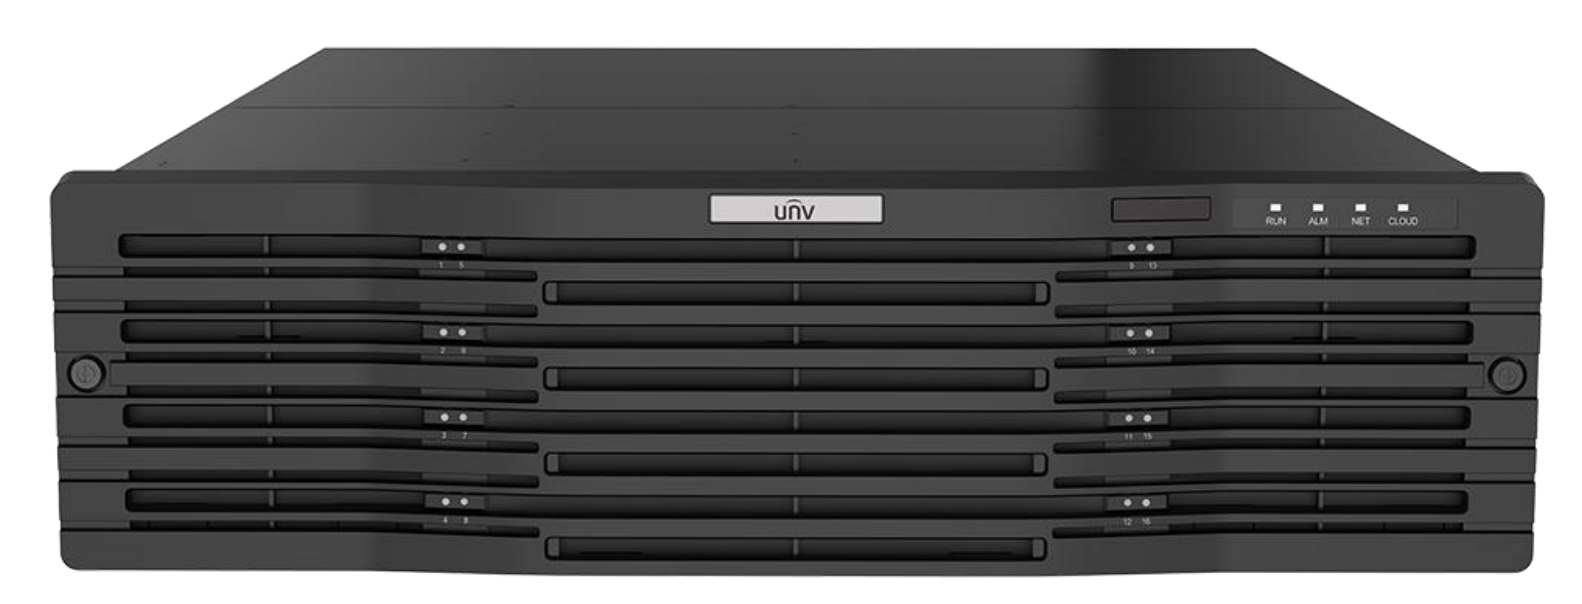 UNIVIEW PRO SERIES 64CH NVR UPTO 16MP 640Mbps INPUT 16x SATA HDD PORT UP TO 16TB EACH